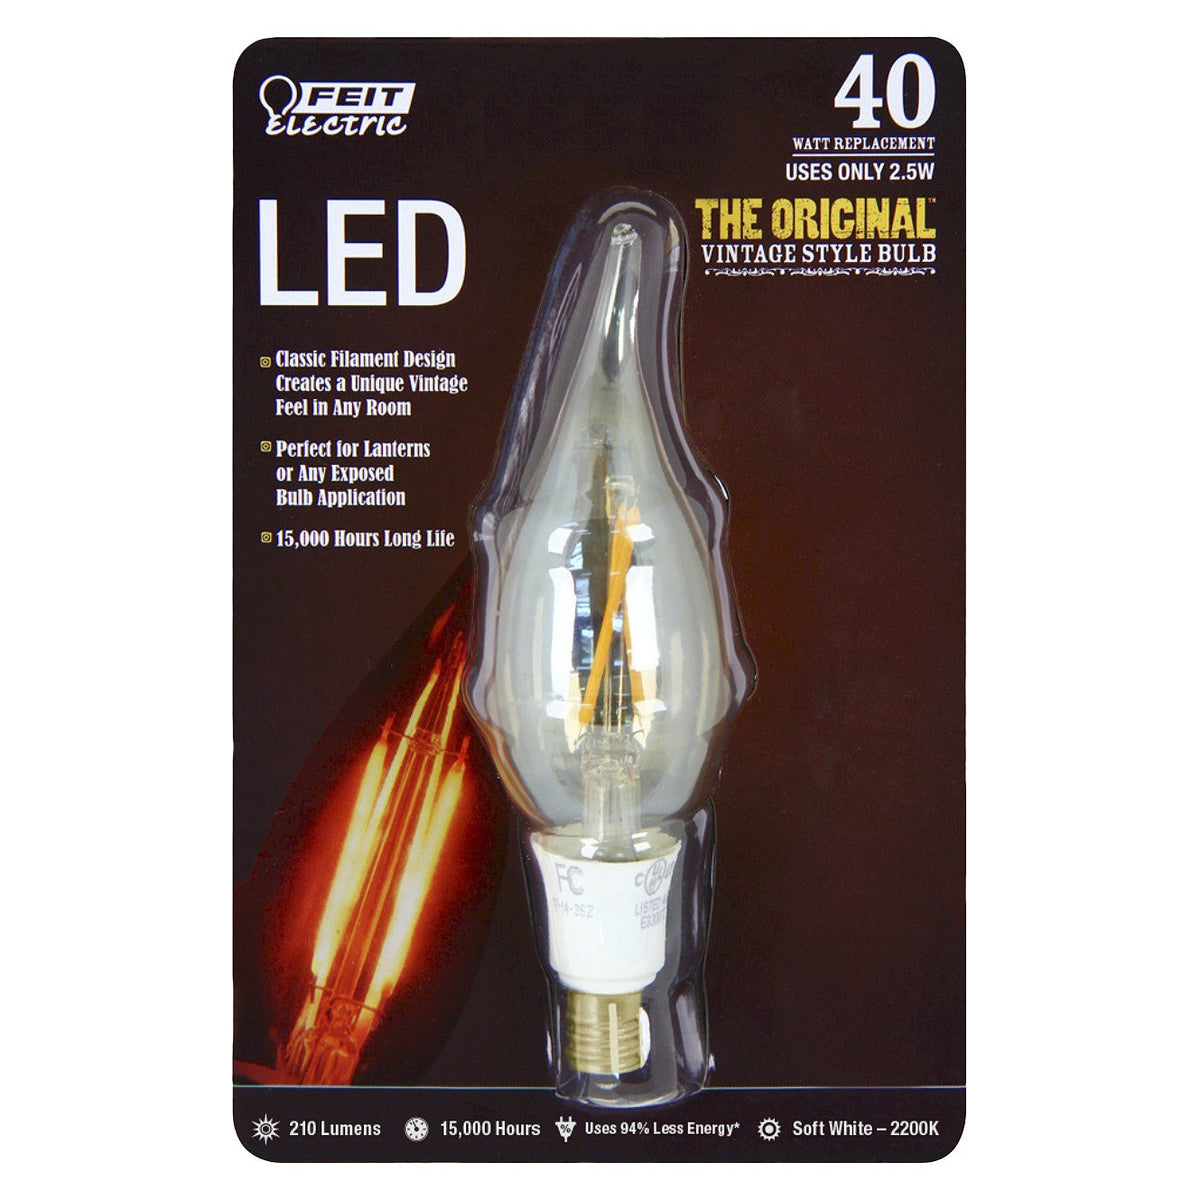 buy decorative light bulbs at cheap rate in bulk. wholesale & retail outdoor lighting products store. home décor ideas, maintenance, repair replacement parts